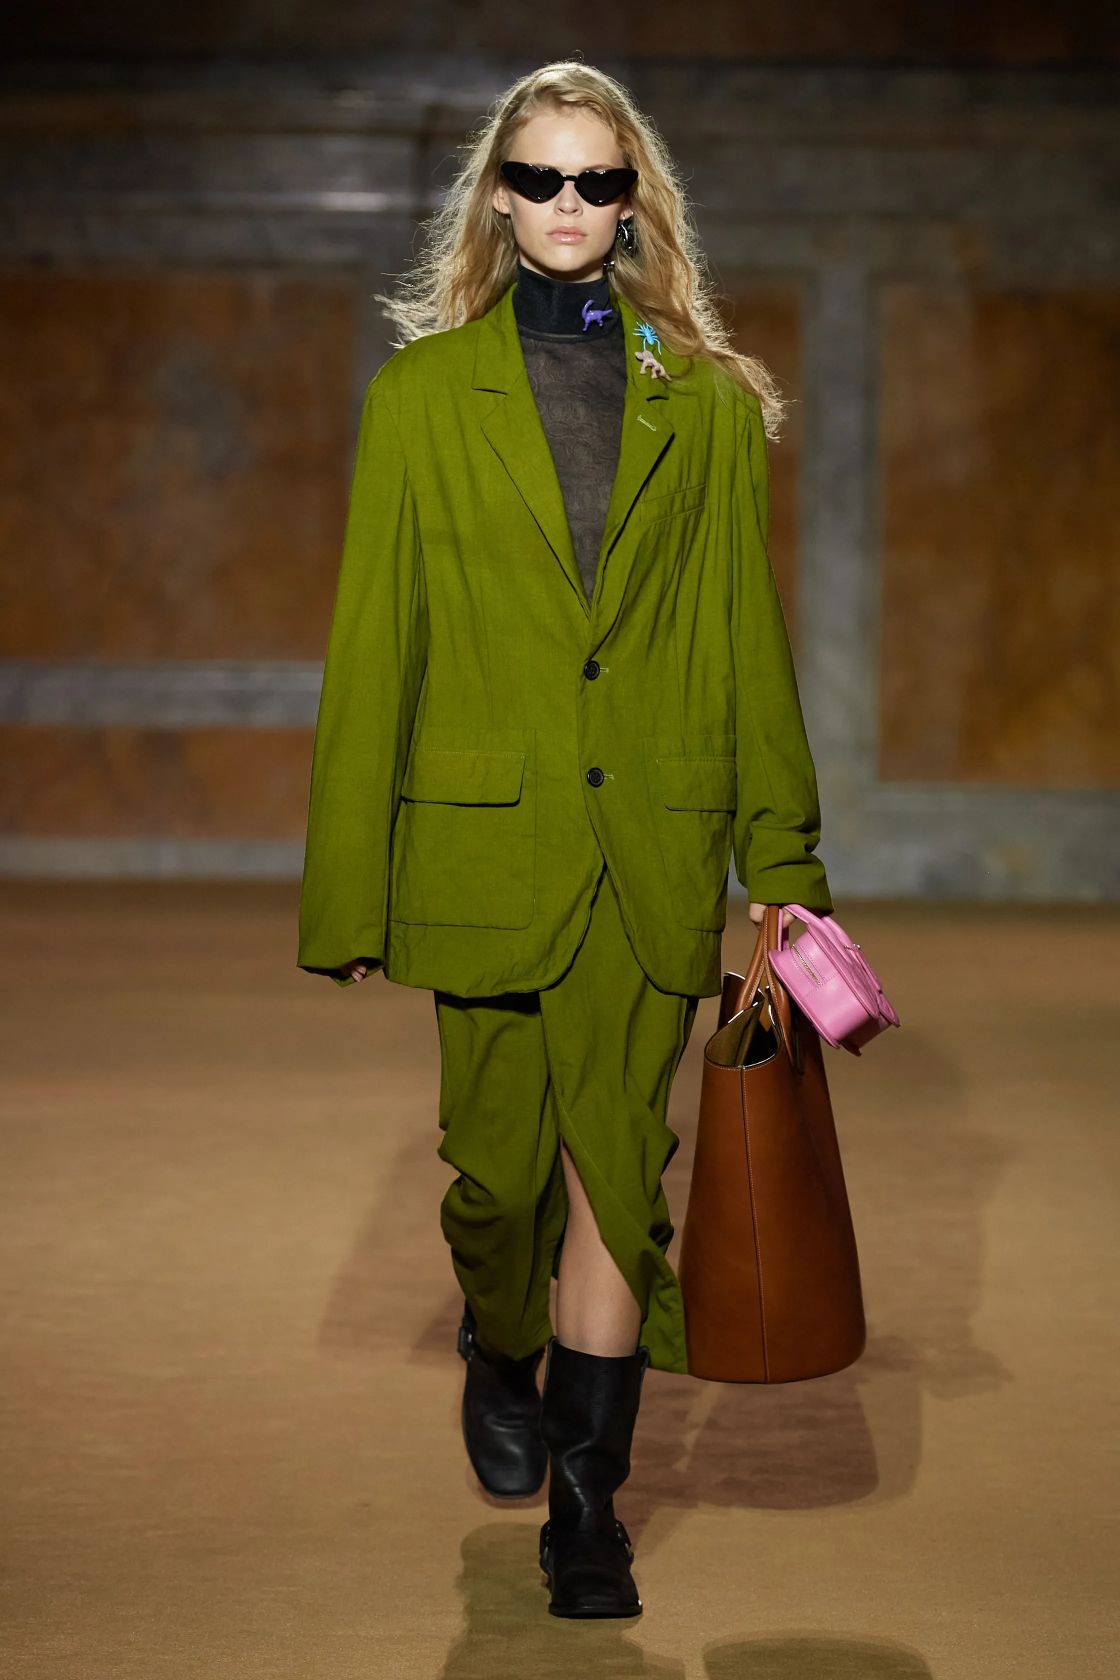 Highlights From New York Fashion Week SS24 - A&E Magazine